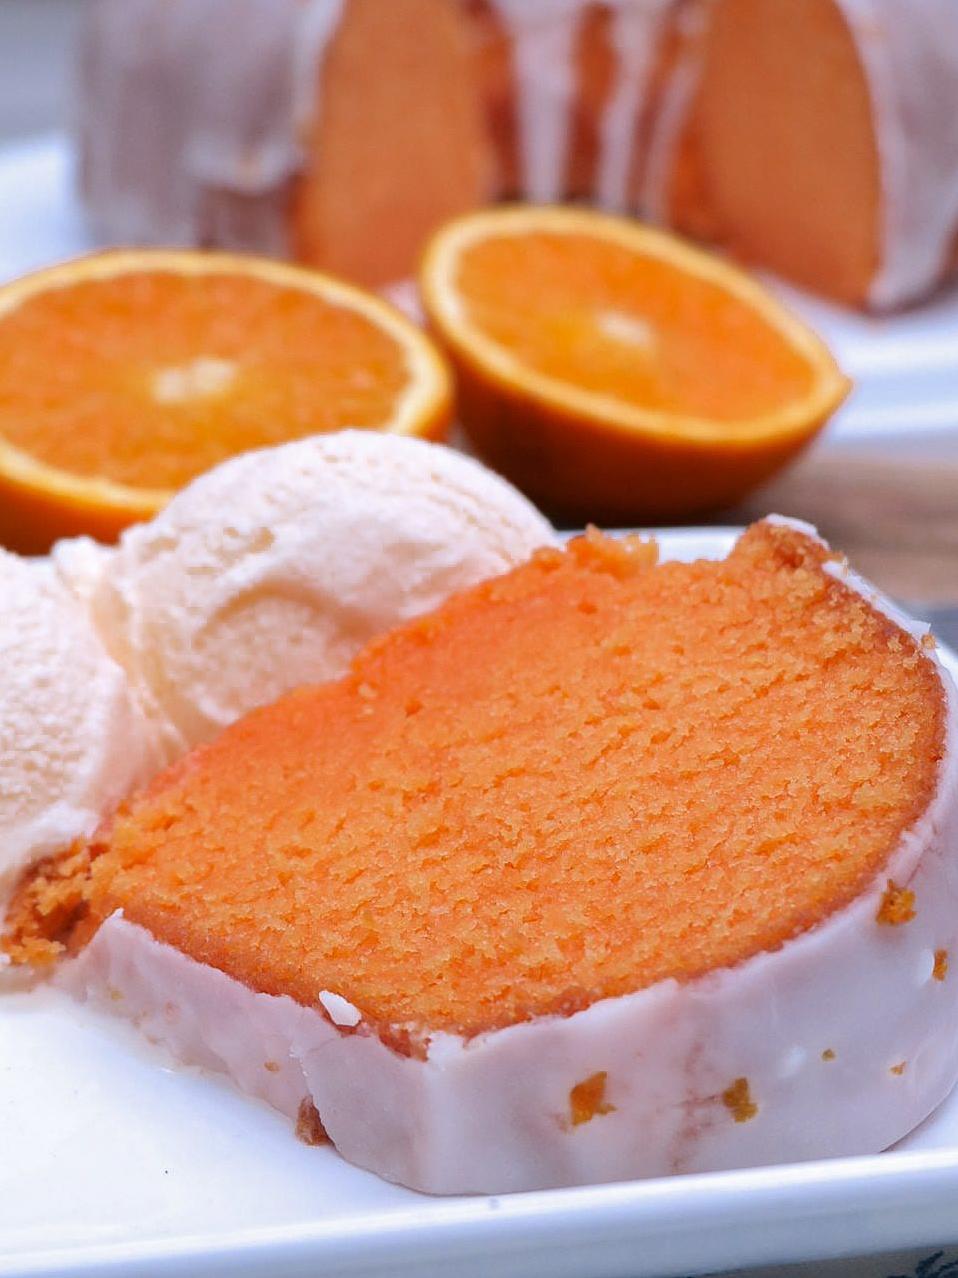  This pound cake is incredibly moist and infused with a fresh orange flavor.